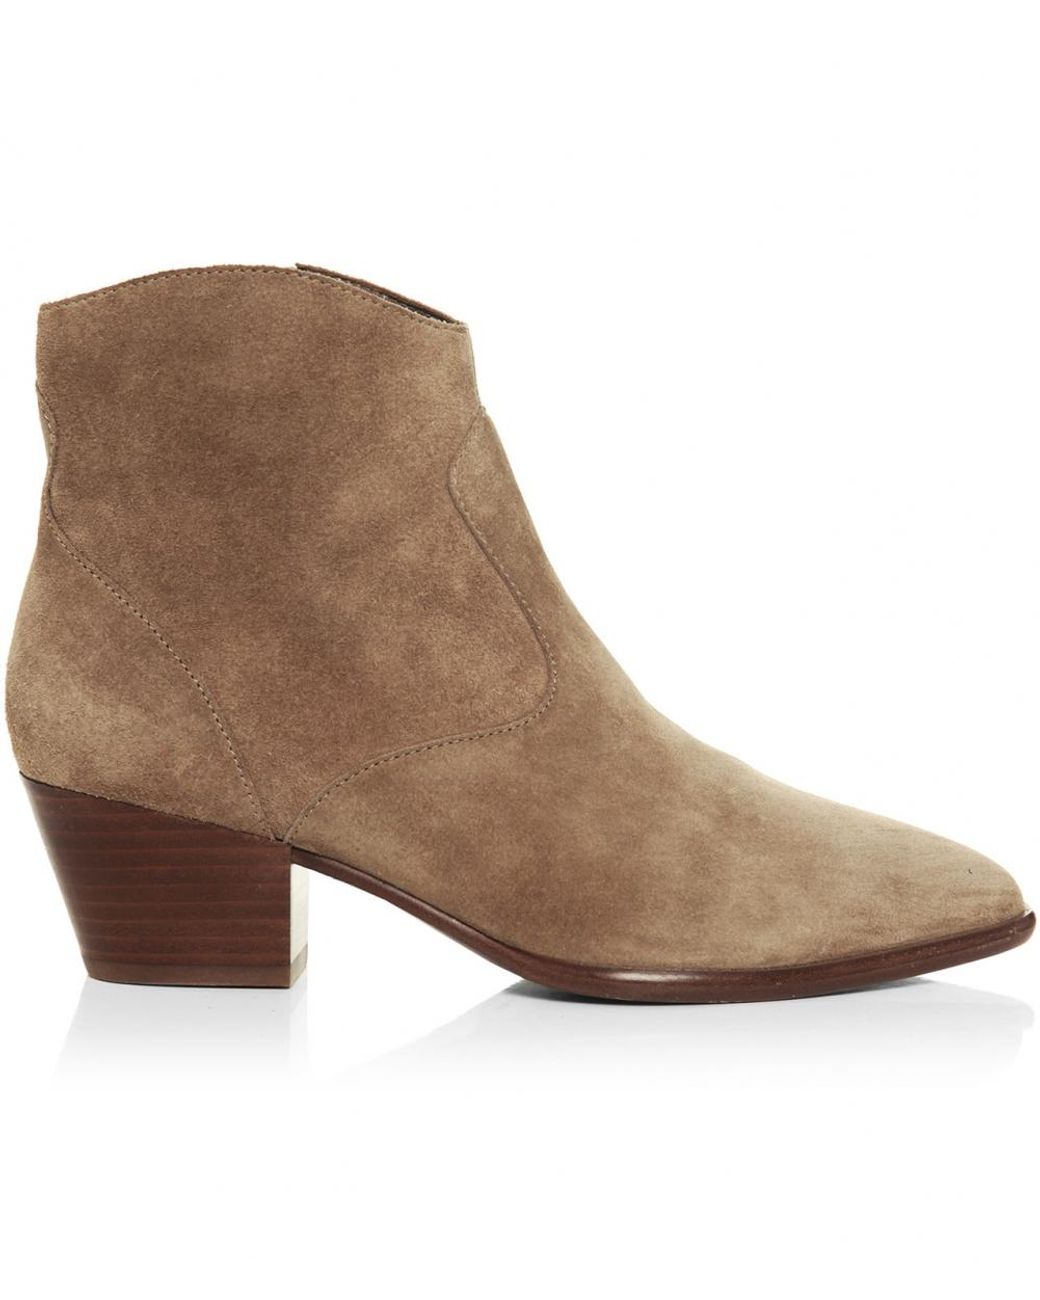 Ash Heidi Baby Soft Suede Ankle Boots in Beige (Natural) | Lyst